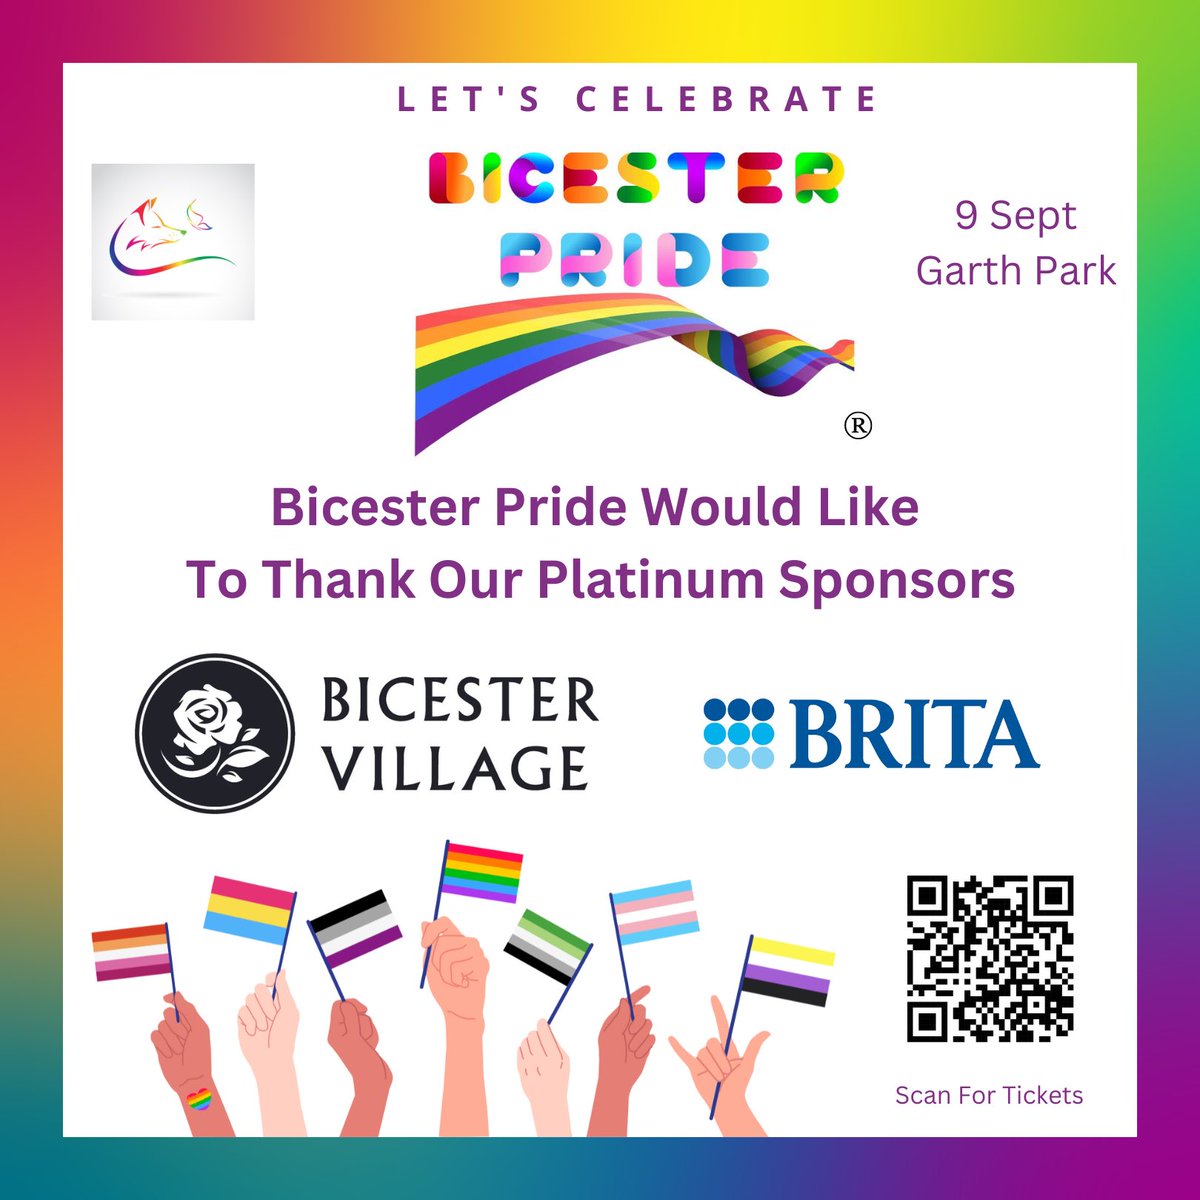 @BicesterPride would like to thank our Platinum Sponsors - 🌟 @bicestervillage & Brita UK , without which we couldn’t run pride